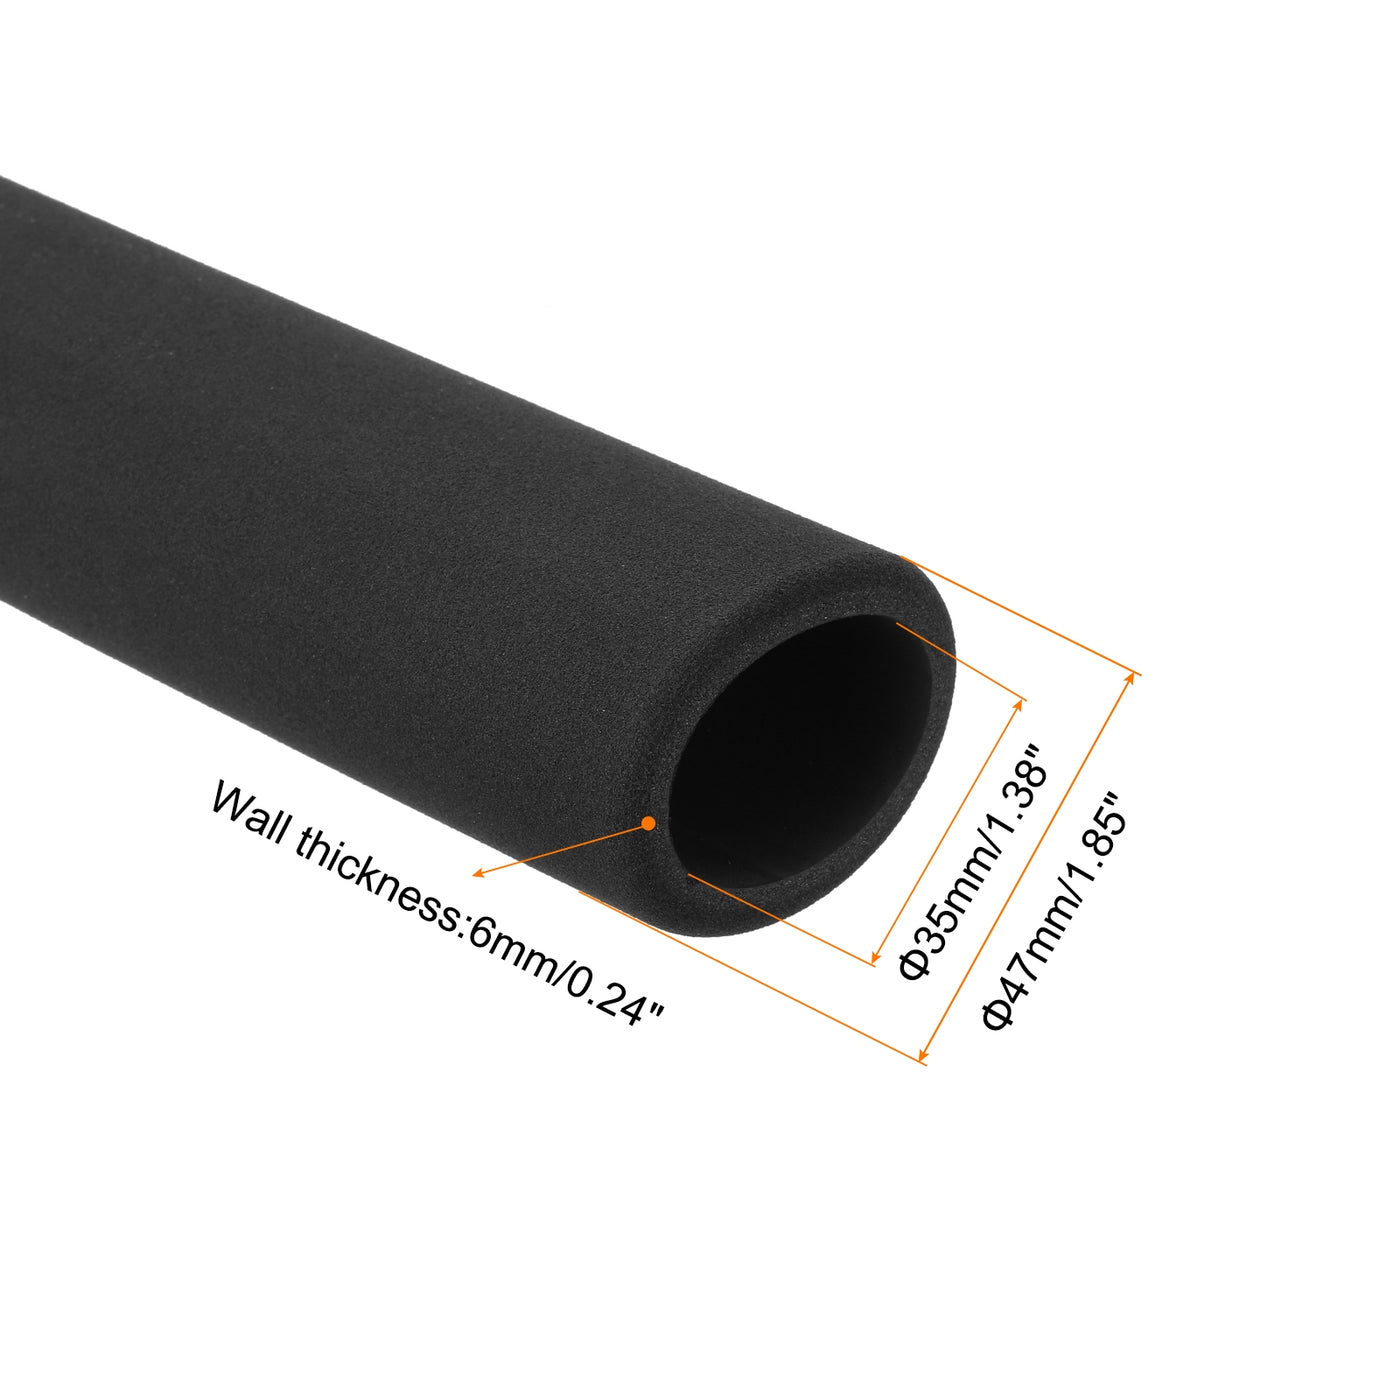 uxcell Uxcell Pipe Insulation Tube Foam Tubing for Handle Grip Support 35mm ID 47mm OD 395mm Heat Preservation Black 2pcs